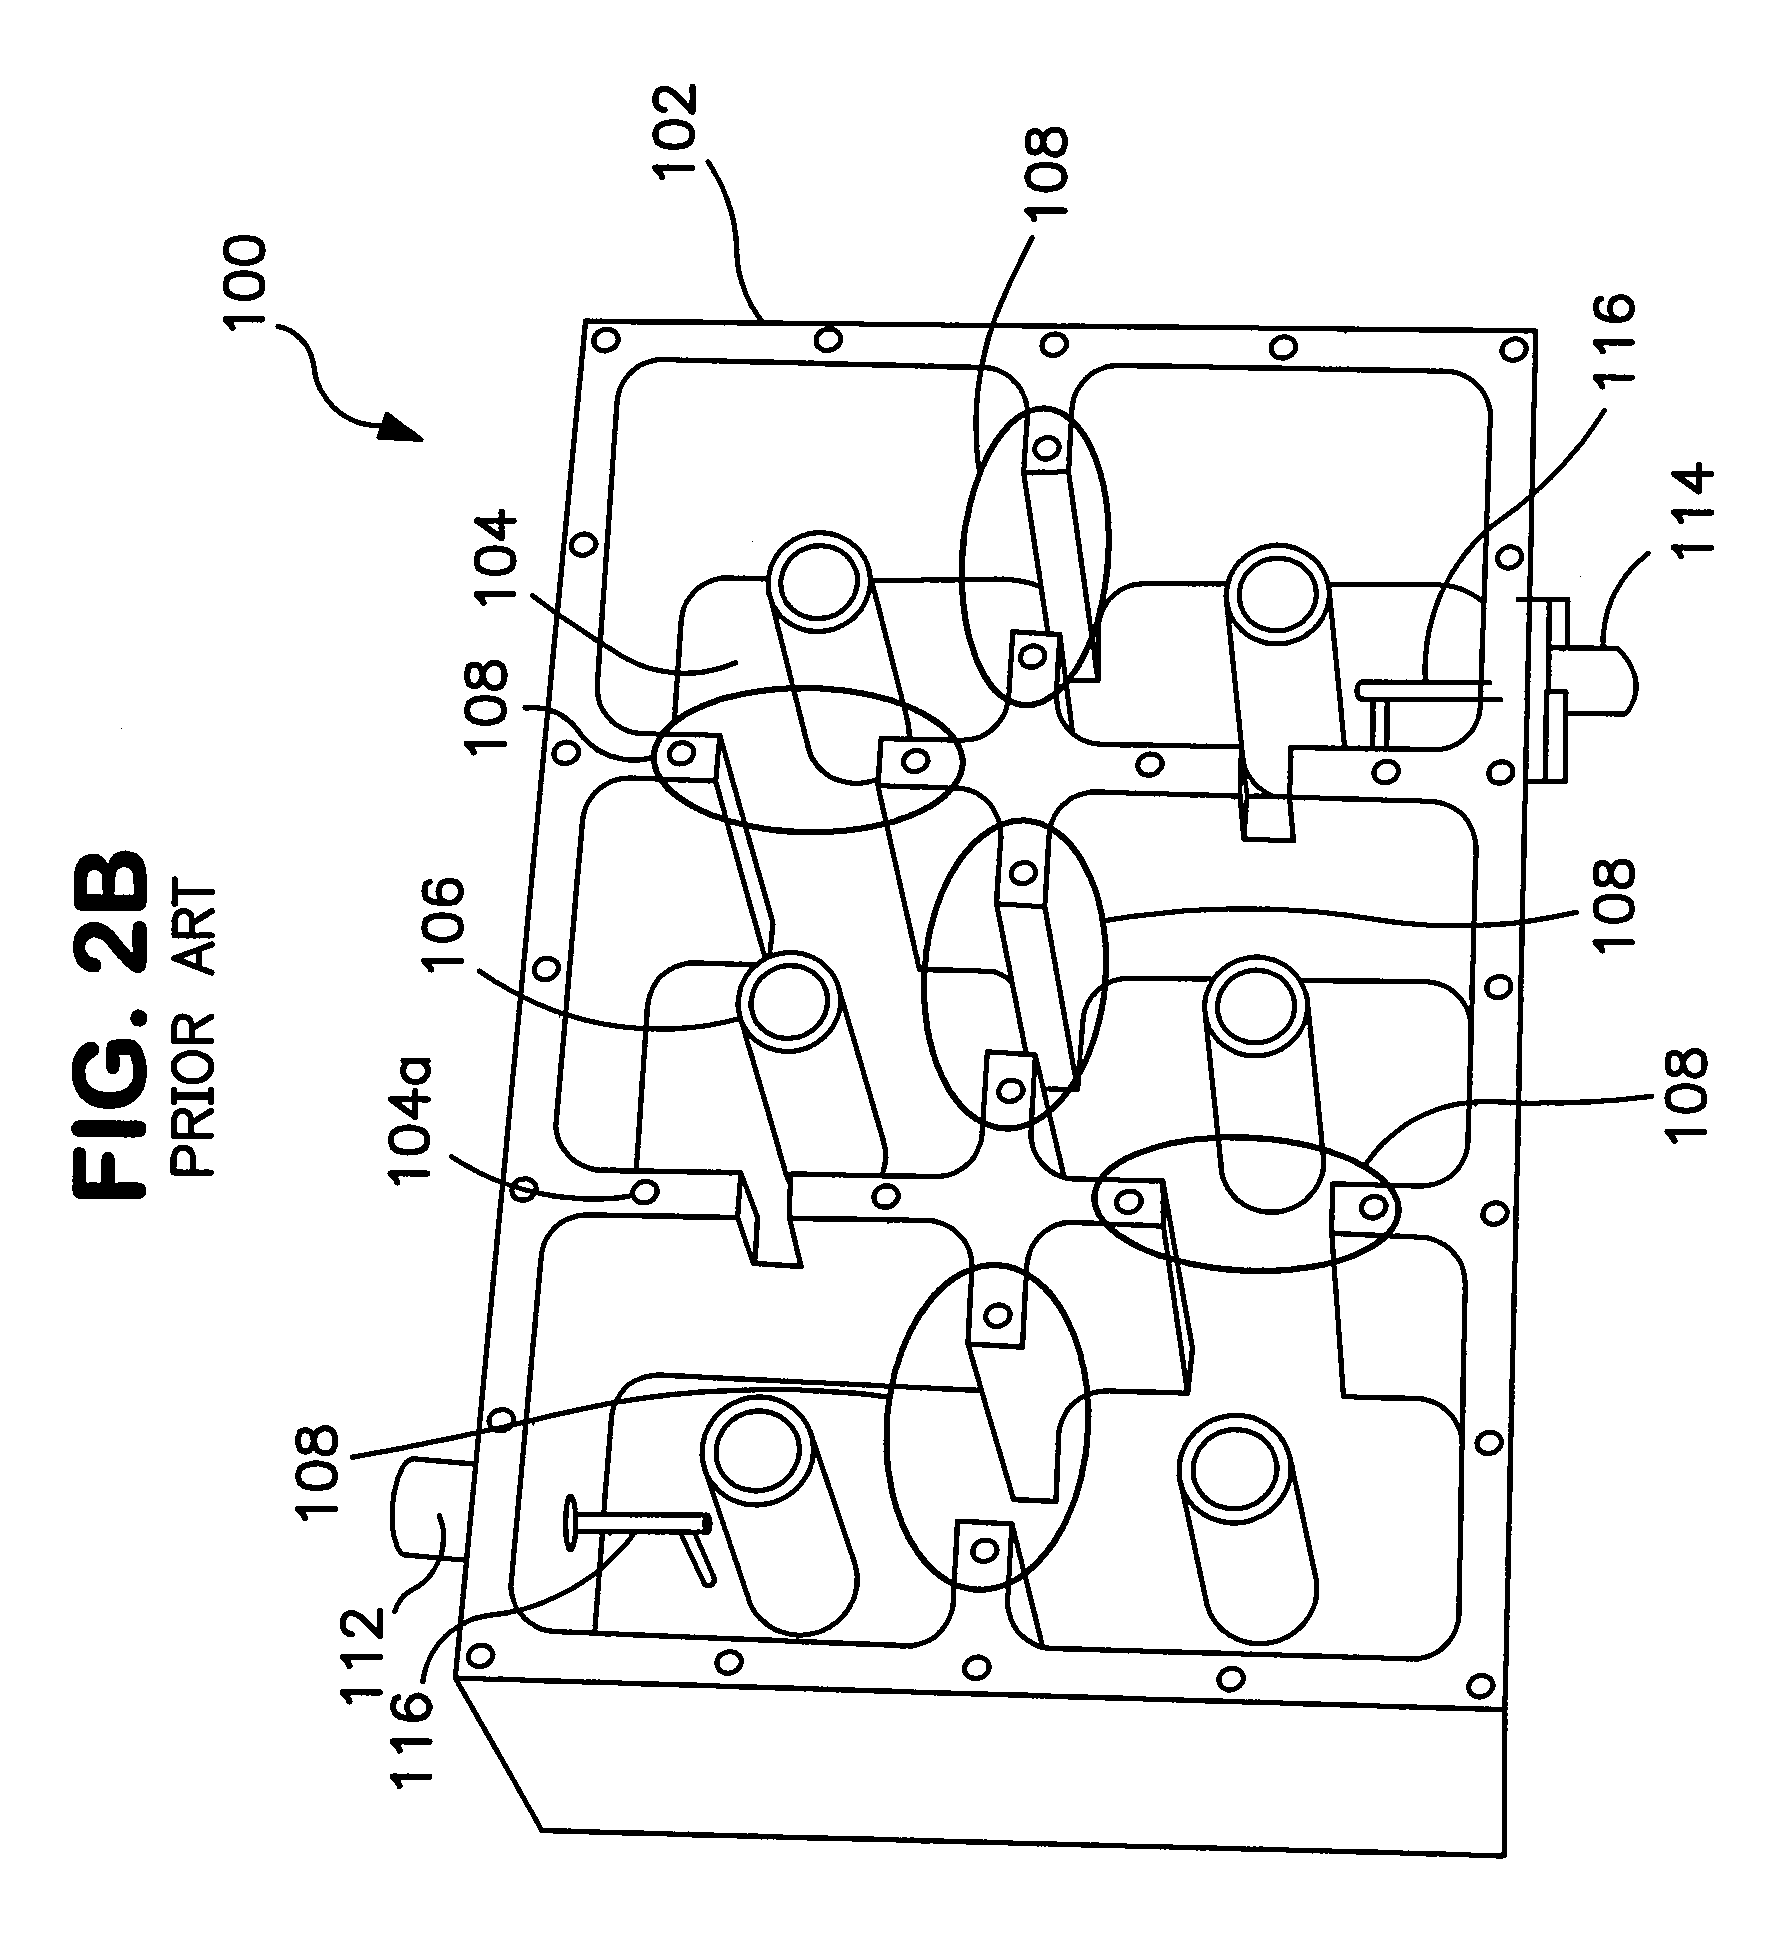 Electronically tunable dielectric resonator circuits